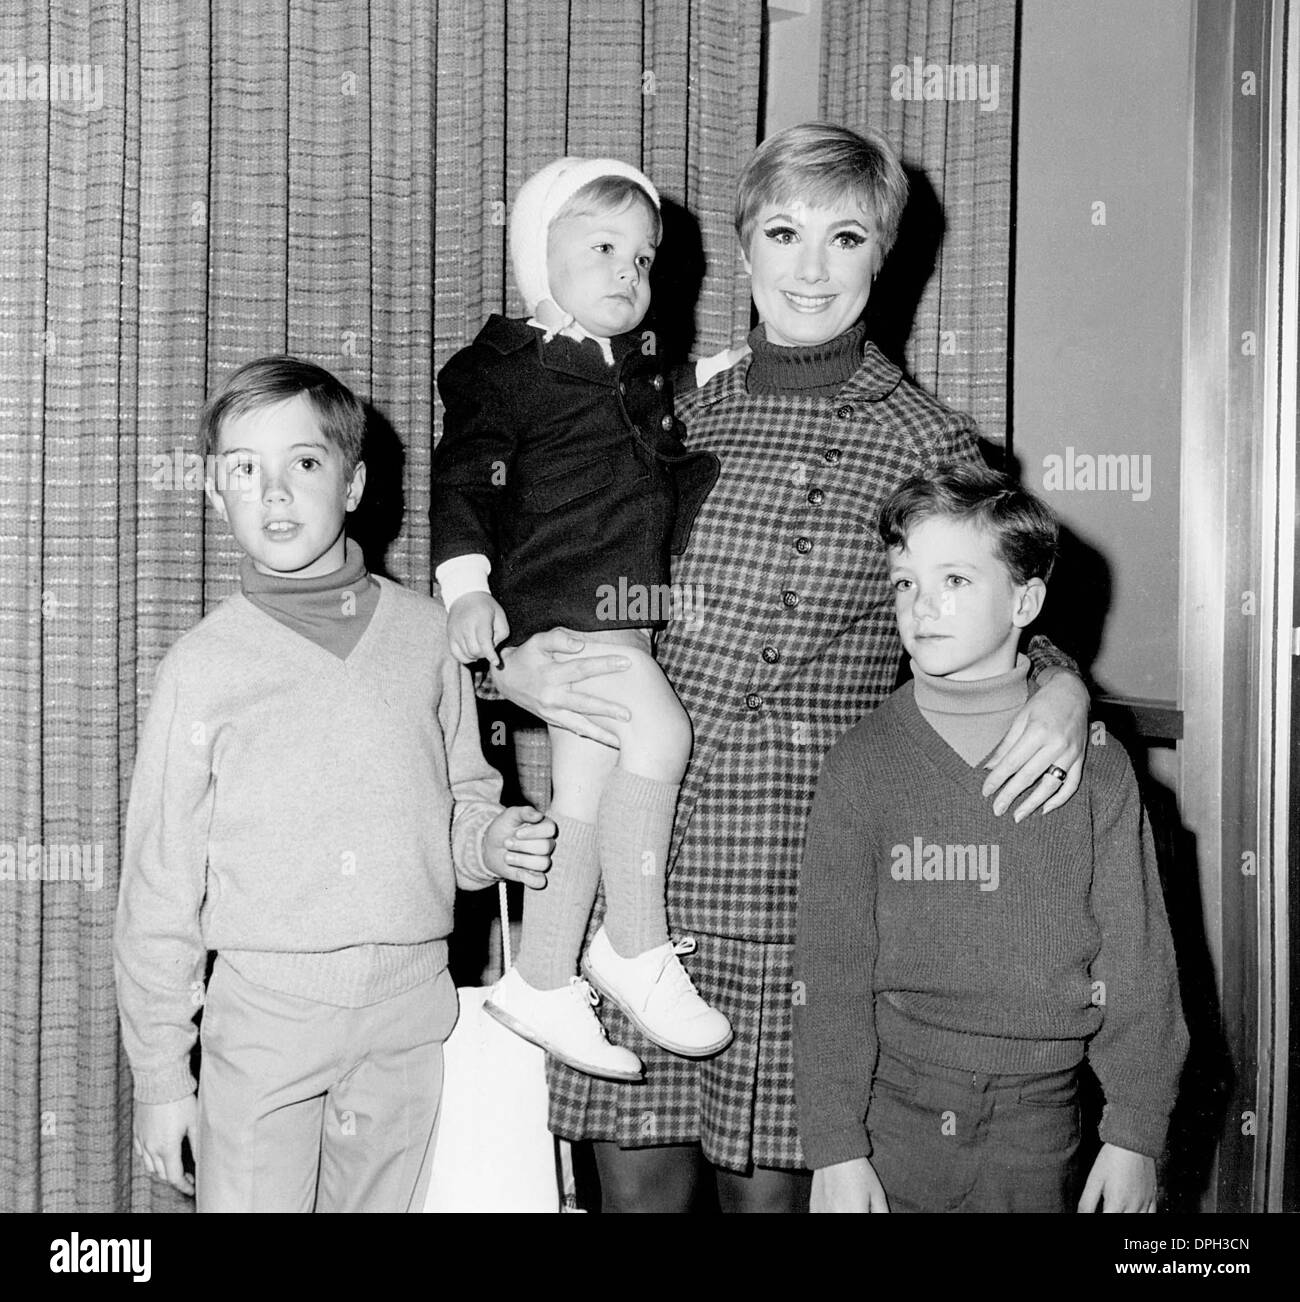 July 12, 2006 - Hollywood, California, U.S. - SHIRLEY JONES WITH HER SONS (SHAUN CASSIDY IS ON LEFT) AT MOMS AND MOPPETS EVENT , BEVERLY HILTON HOTEL 02-17-1968.(Credit Image: © Phil Roach/Globe Photos/ZUMAPRESS.com) Stock Photo